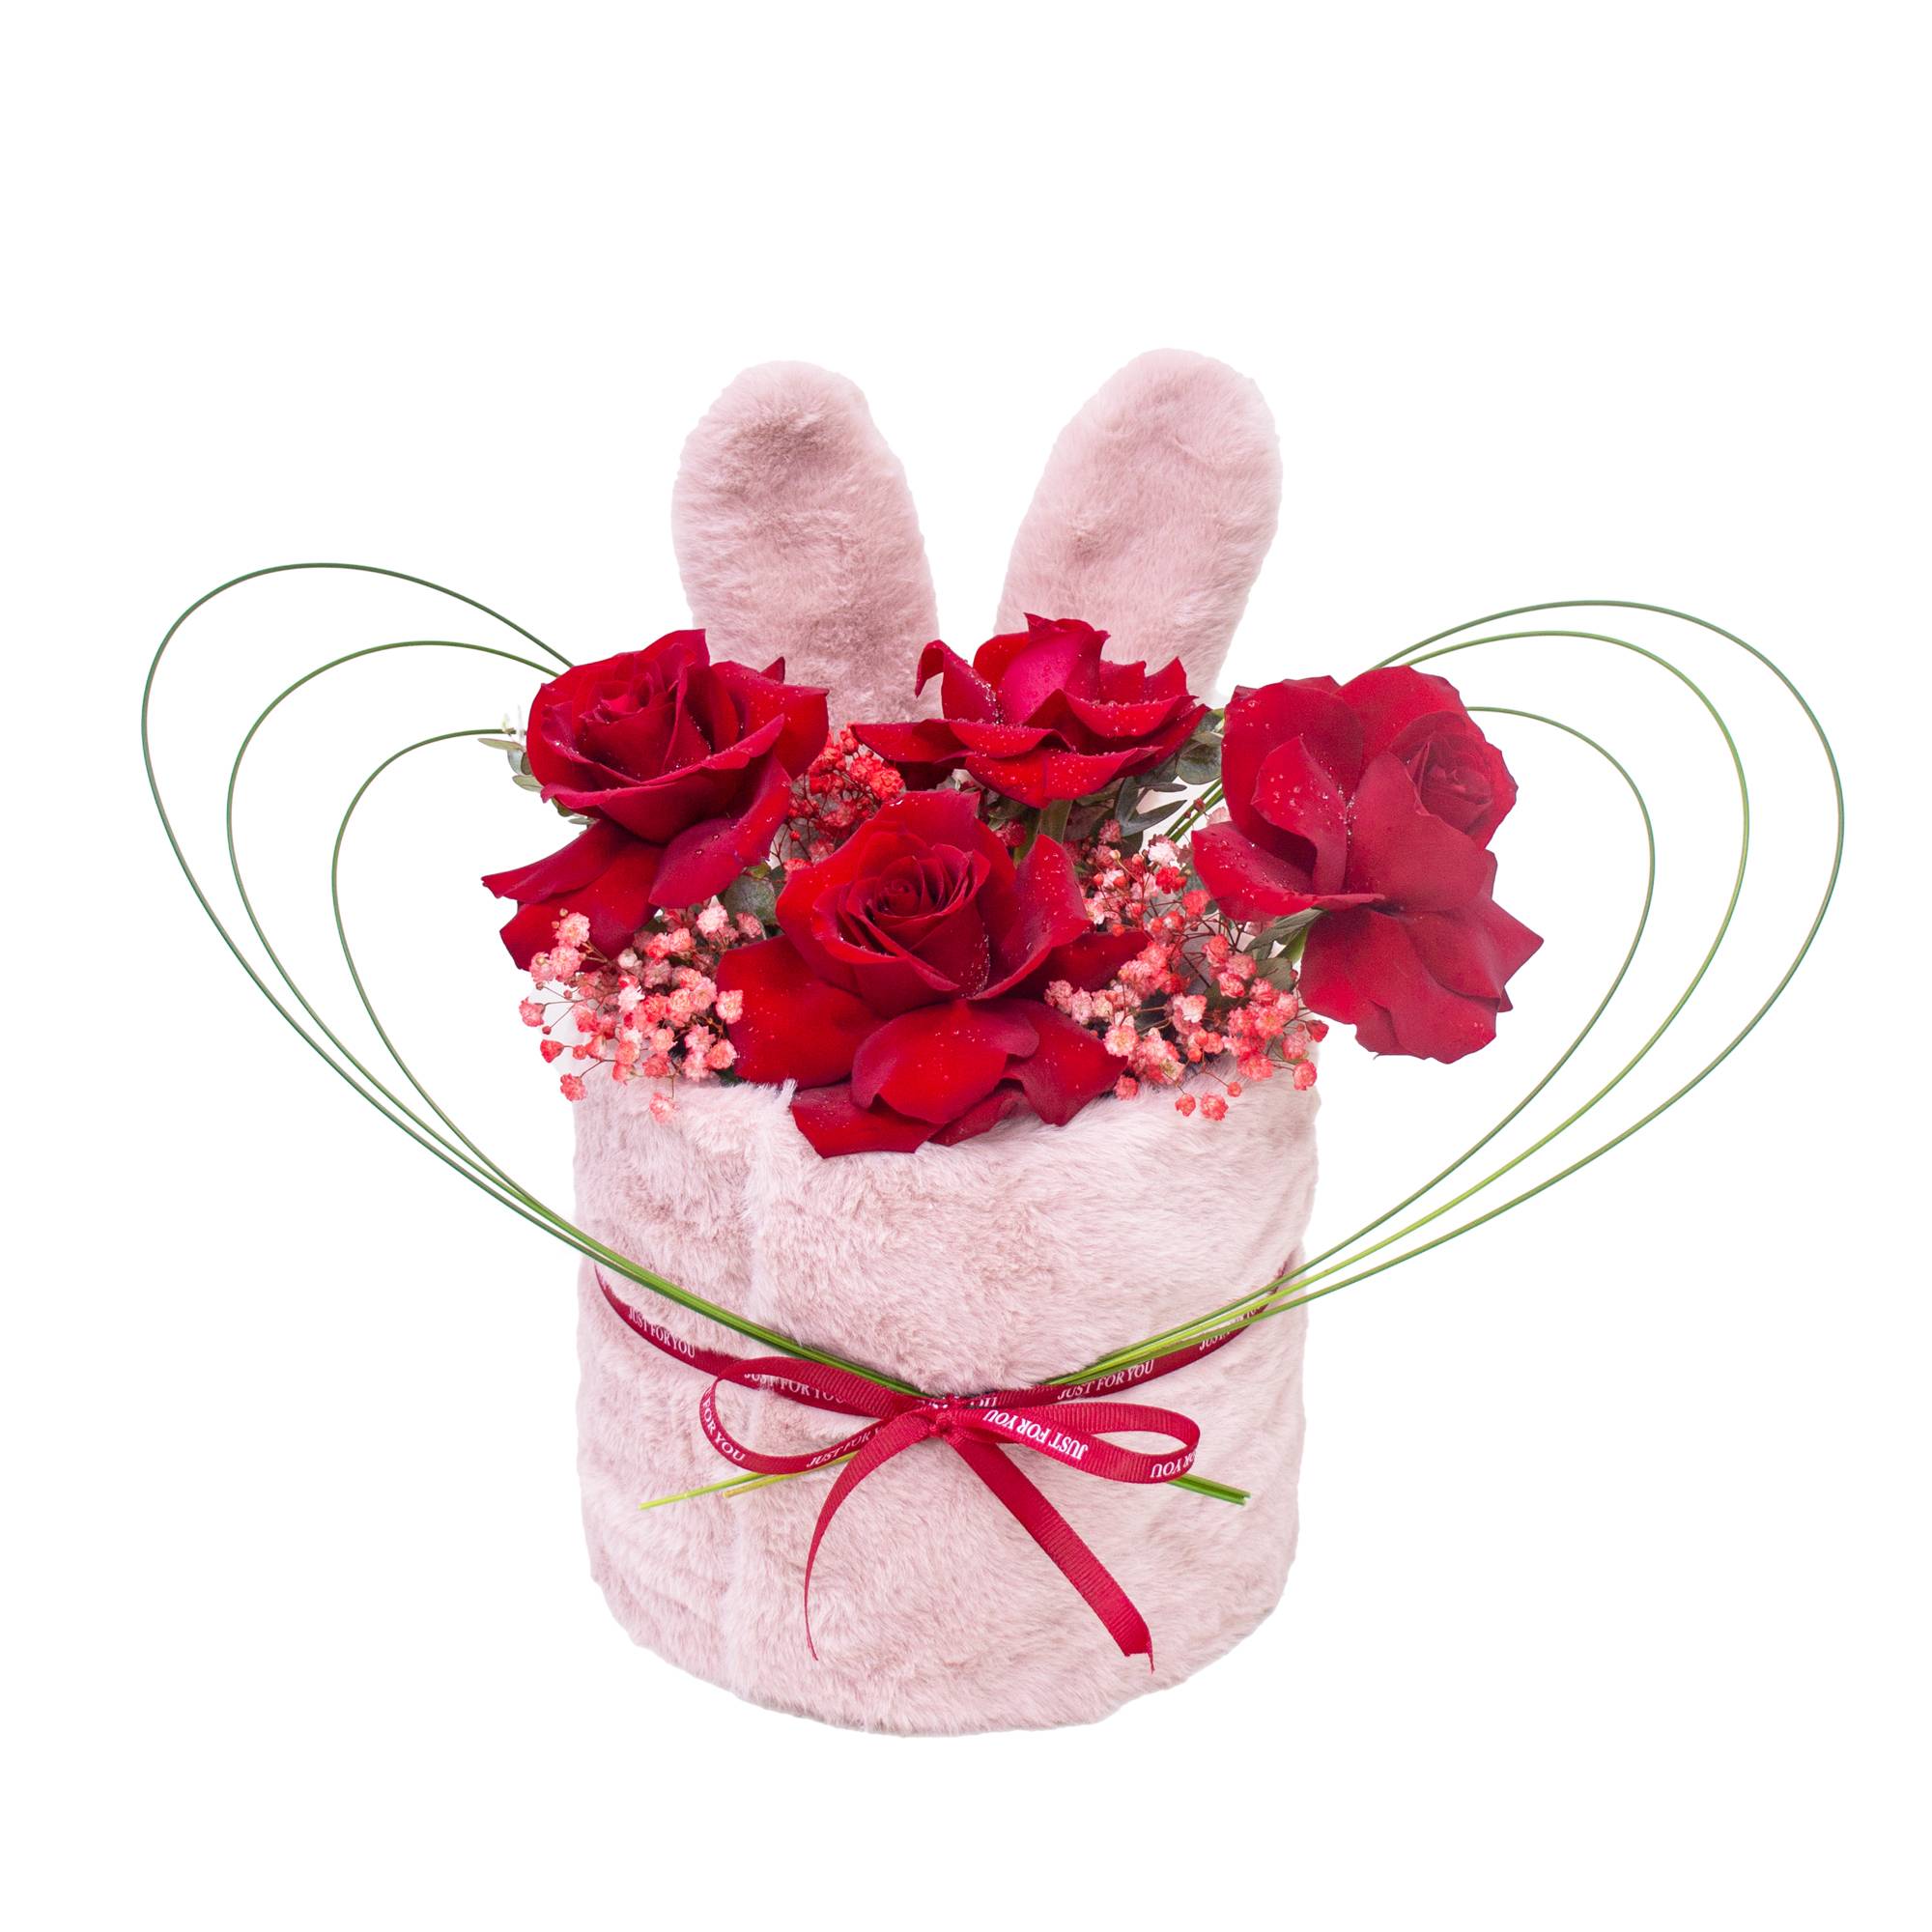 Rabbit-ears-with-roses-valentine-bouquet.jpg